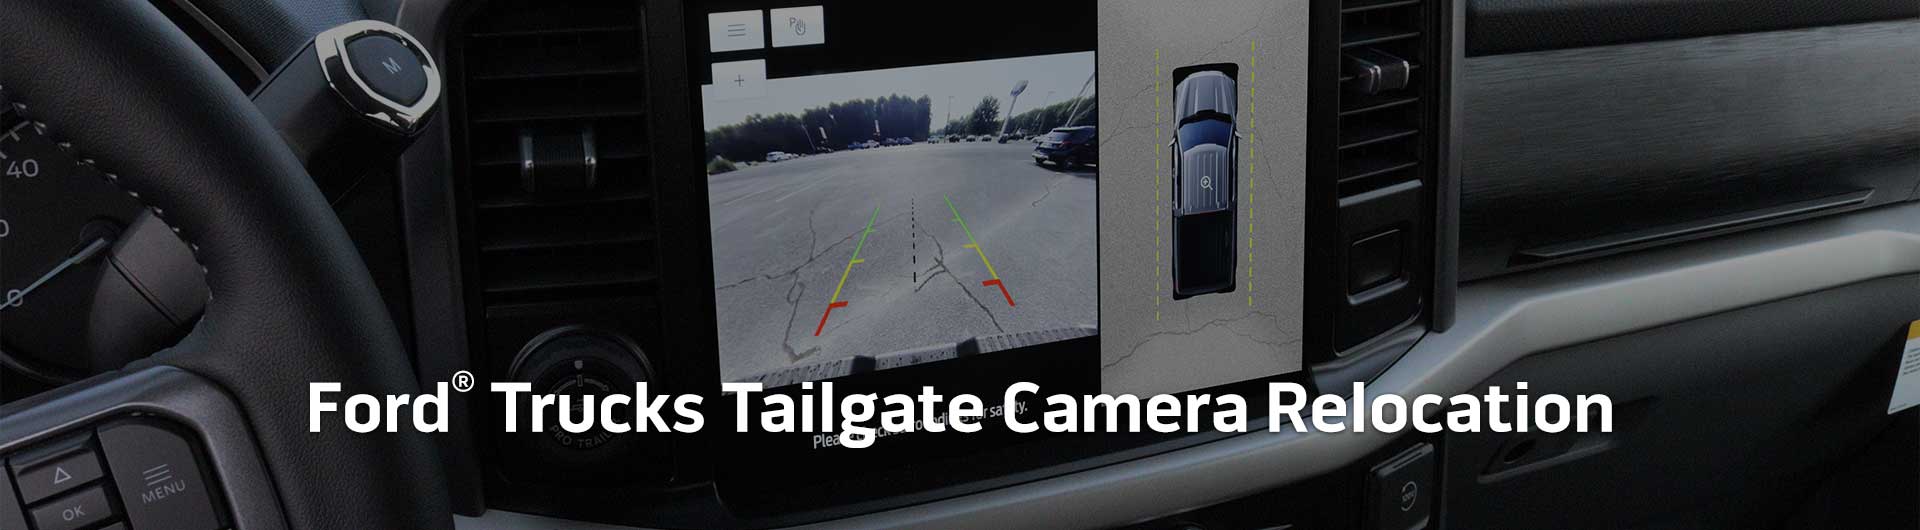 An image showing the in-dash monitor of a Ford truck. The in-dash monitor shows that the truck is in reverse and is displaying both the backup camera and video from the cameras on the front and side of the truck. The image has text that reads Ford Trucks Tailgate Camera Relocation.